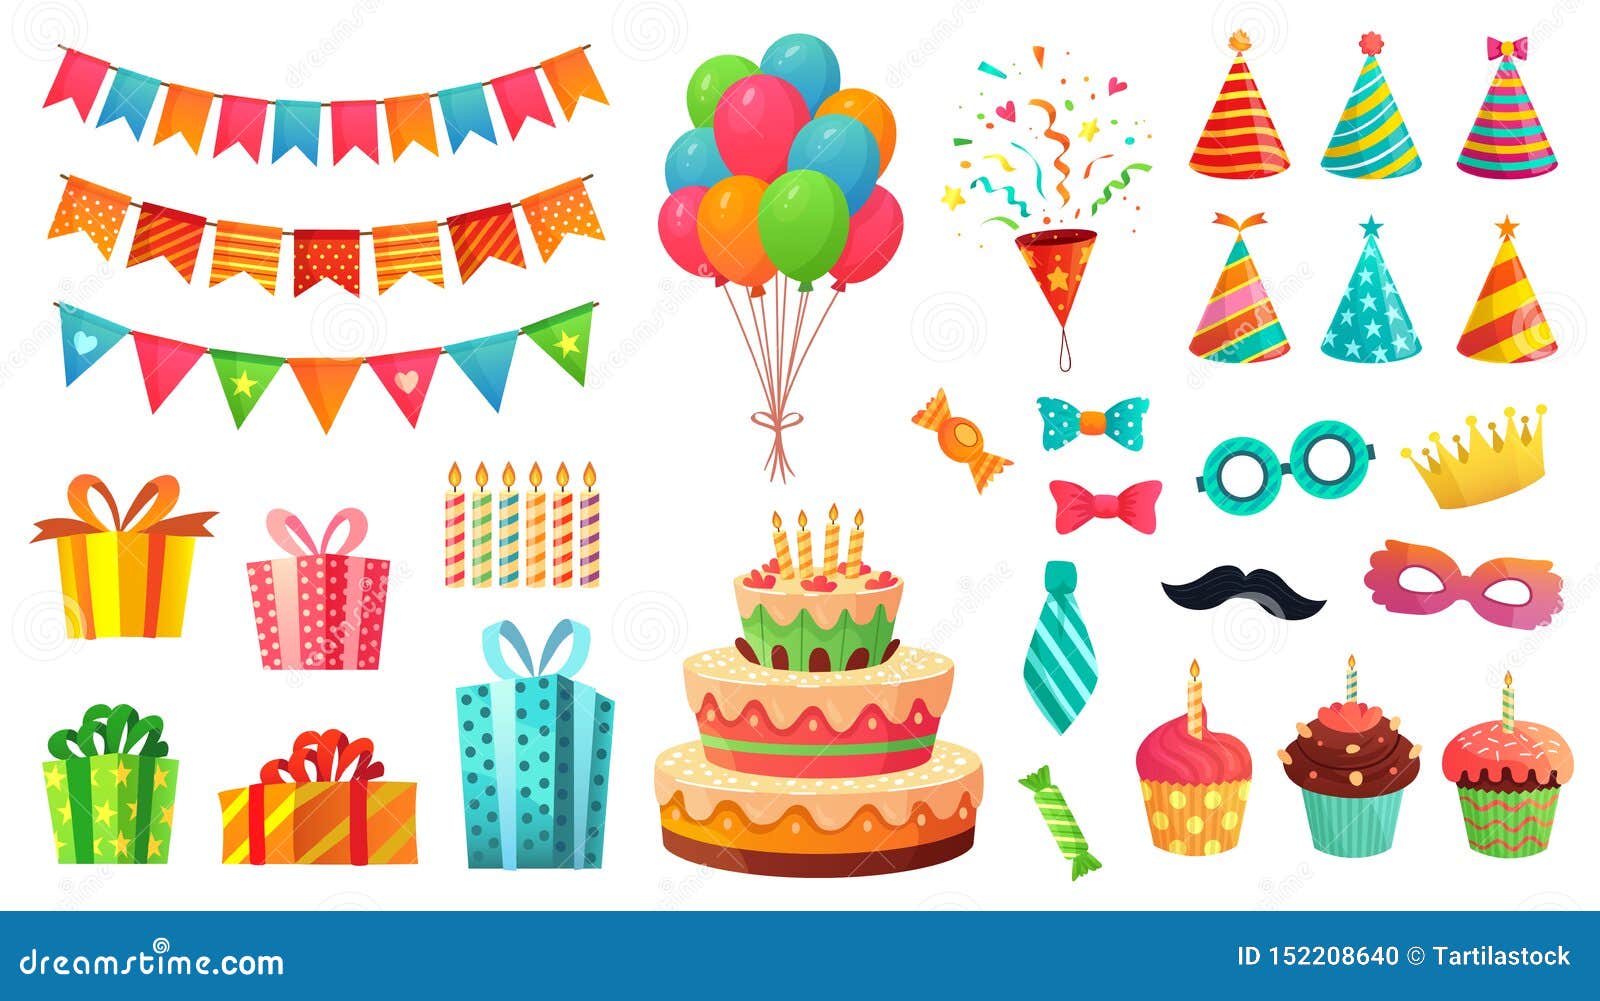 Party Decorations Stock Illustrations – 39,556 Party Decorations Stock Vectors & Clipart - Dreamstime